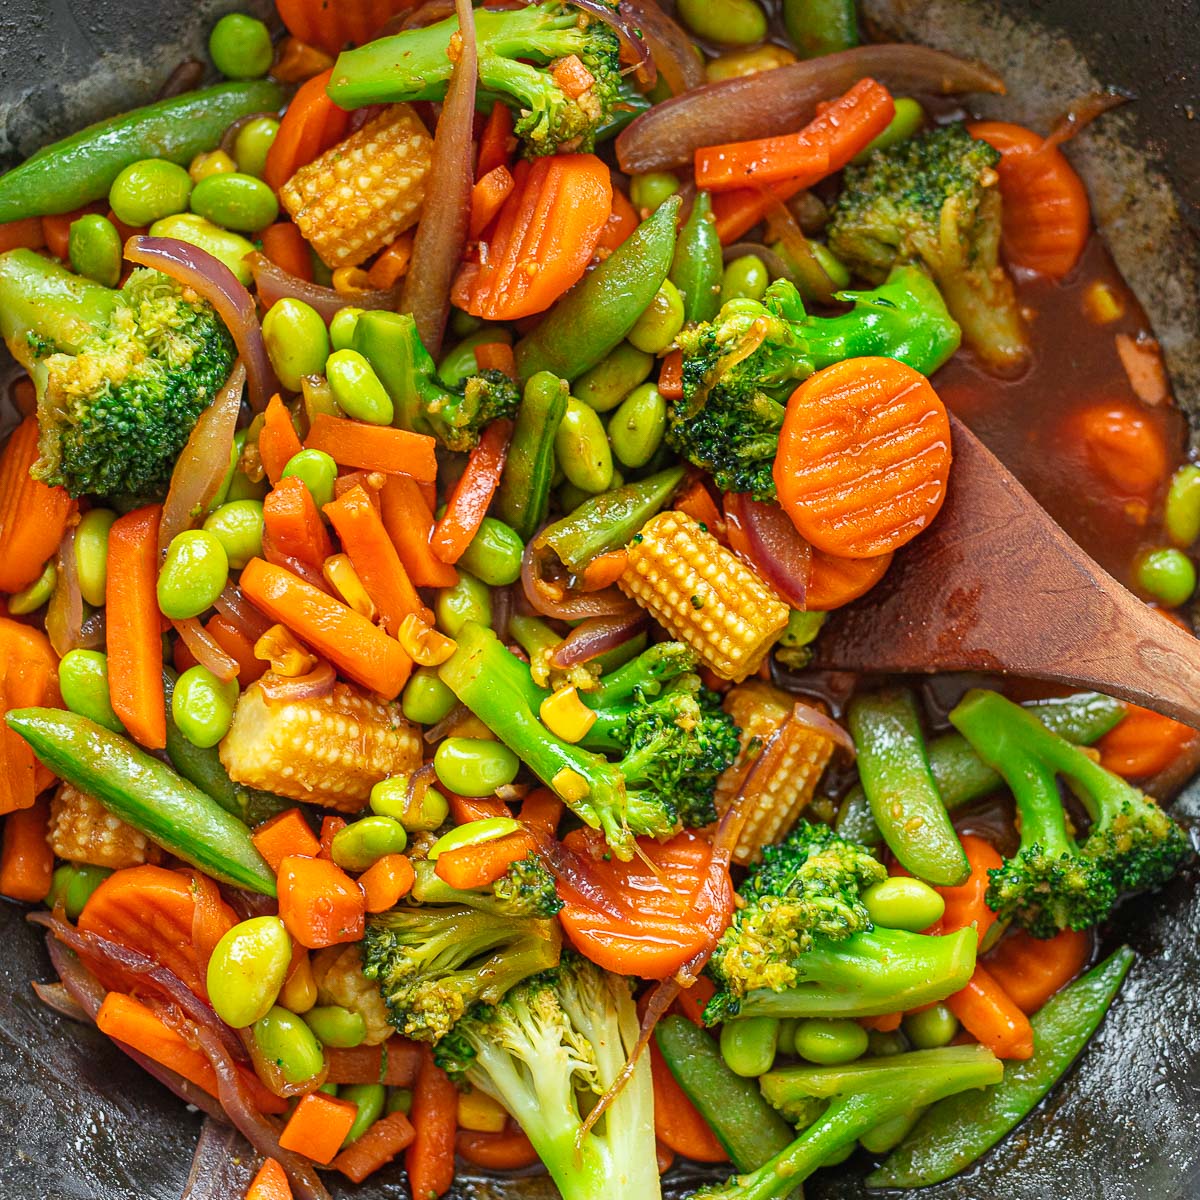 How To Cook Frozen Vegetables For Stir Fry